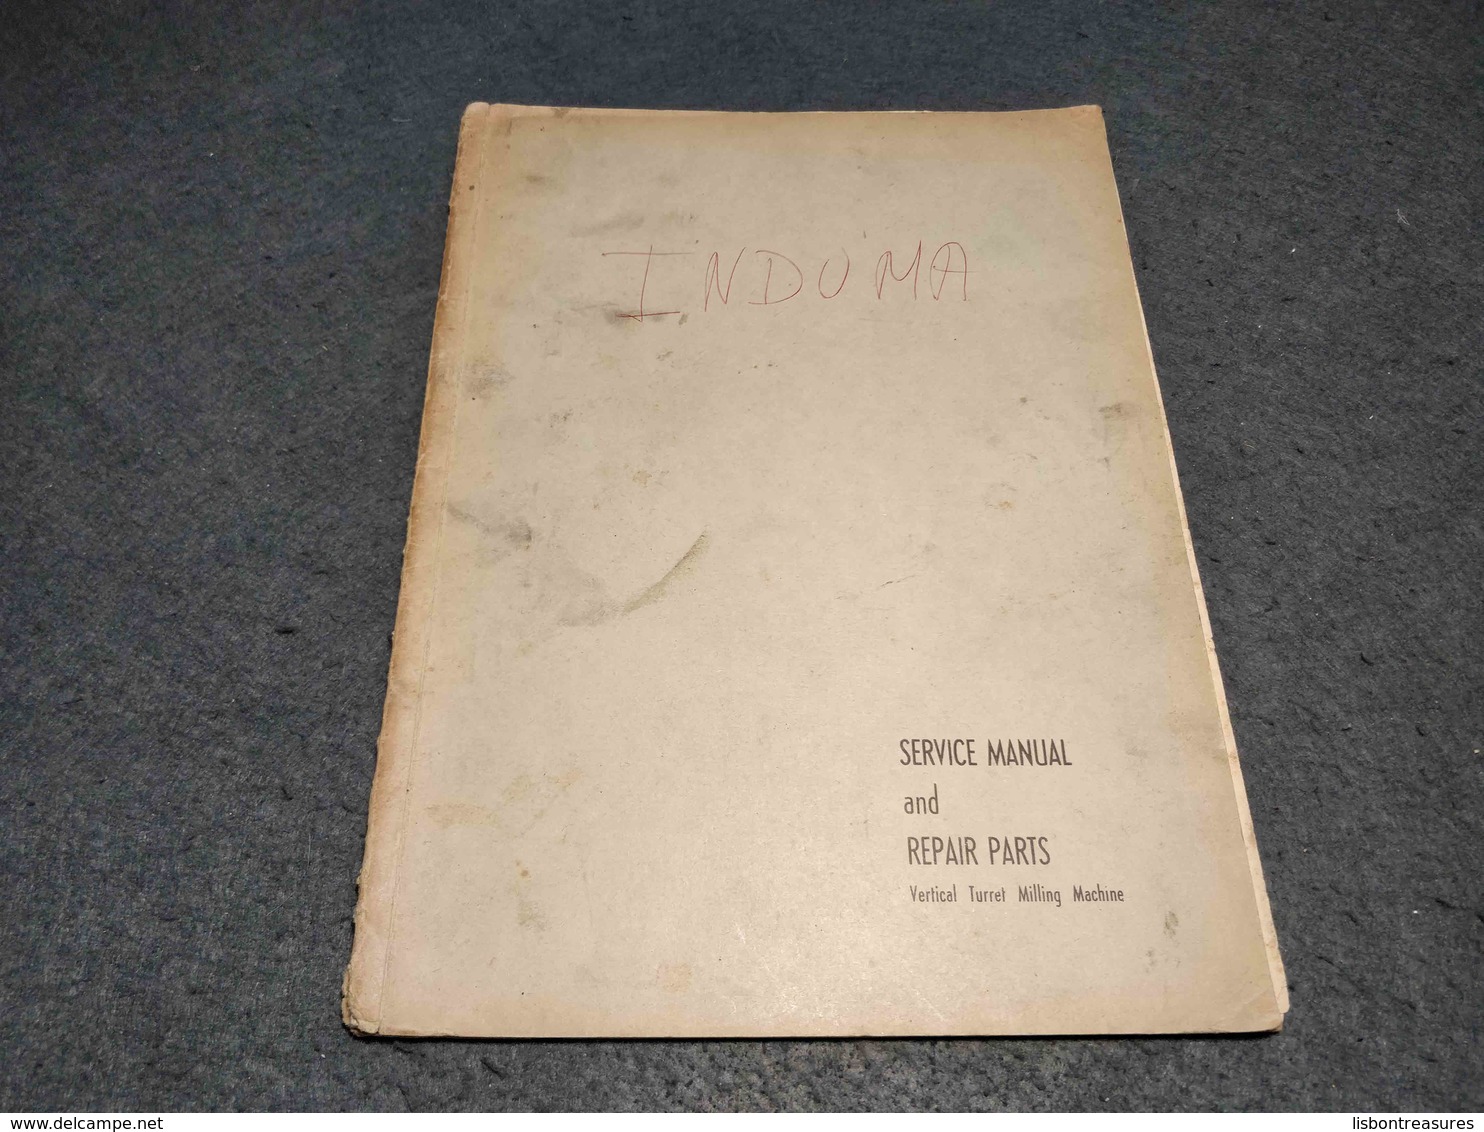 VERY RARE INDUMA VERTICAL TURRET MILLING MACHINE SERVICE MANUAL AND REPAIR PARTS - Supplies And Equipment